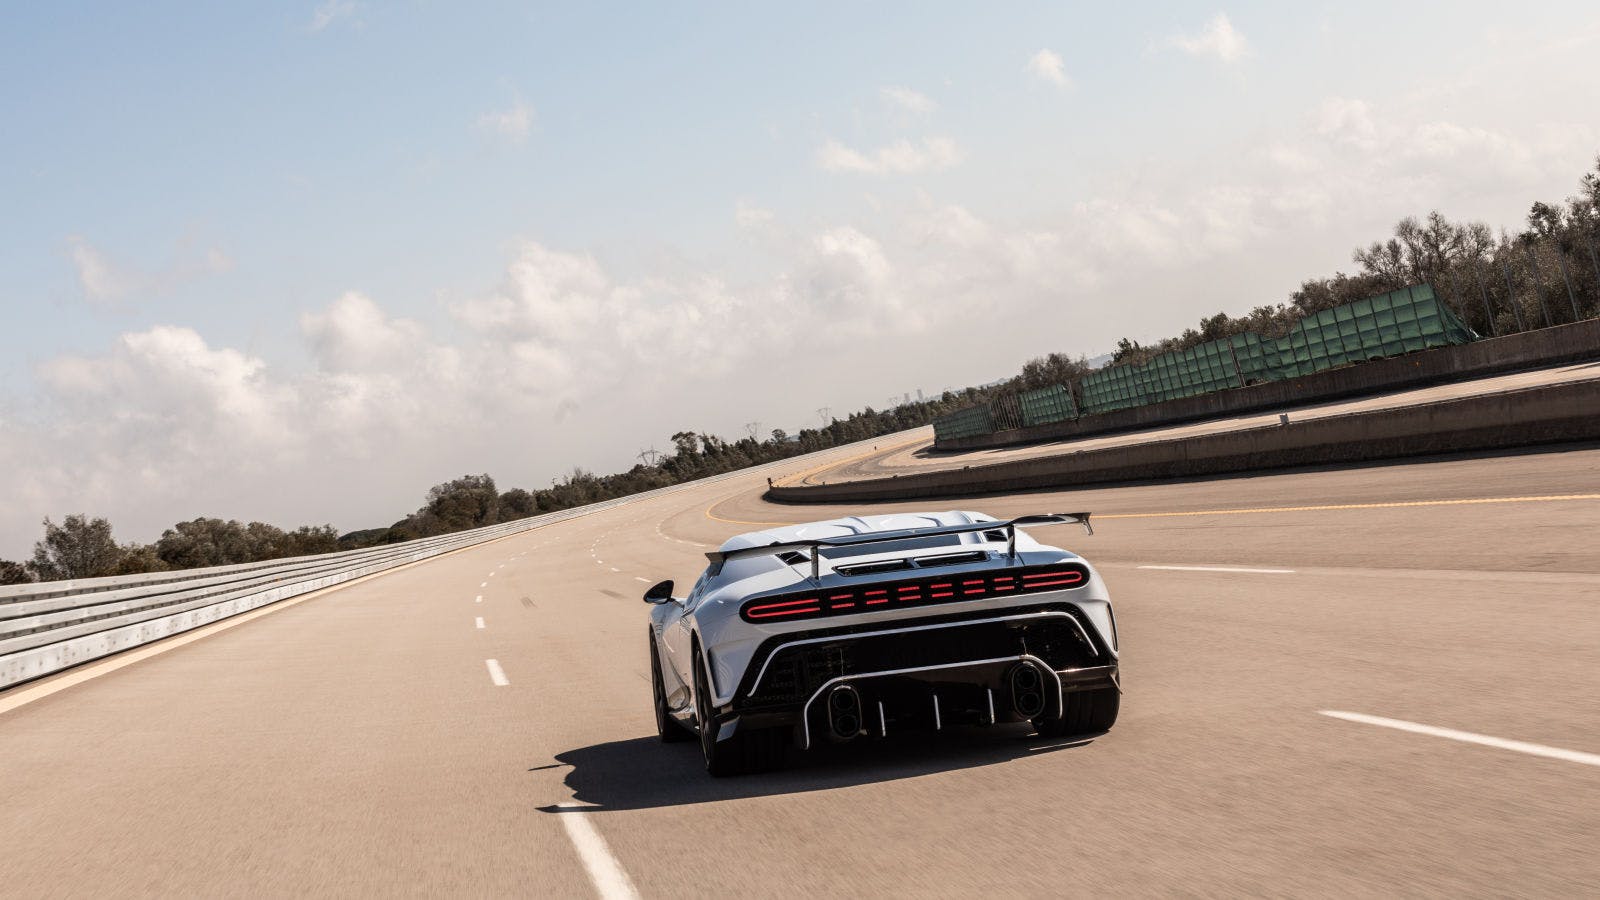 Before entering production, the Centodieci has been subjected to over 50,000km of intense examination at the Nardò test track in southern Italy. 